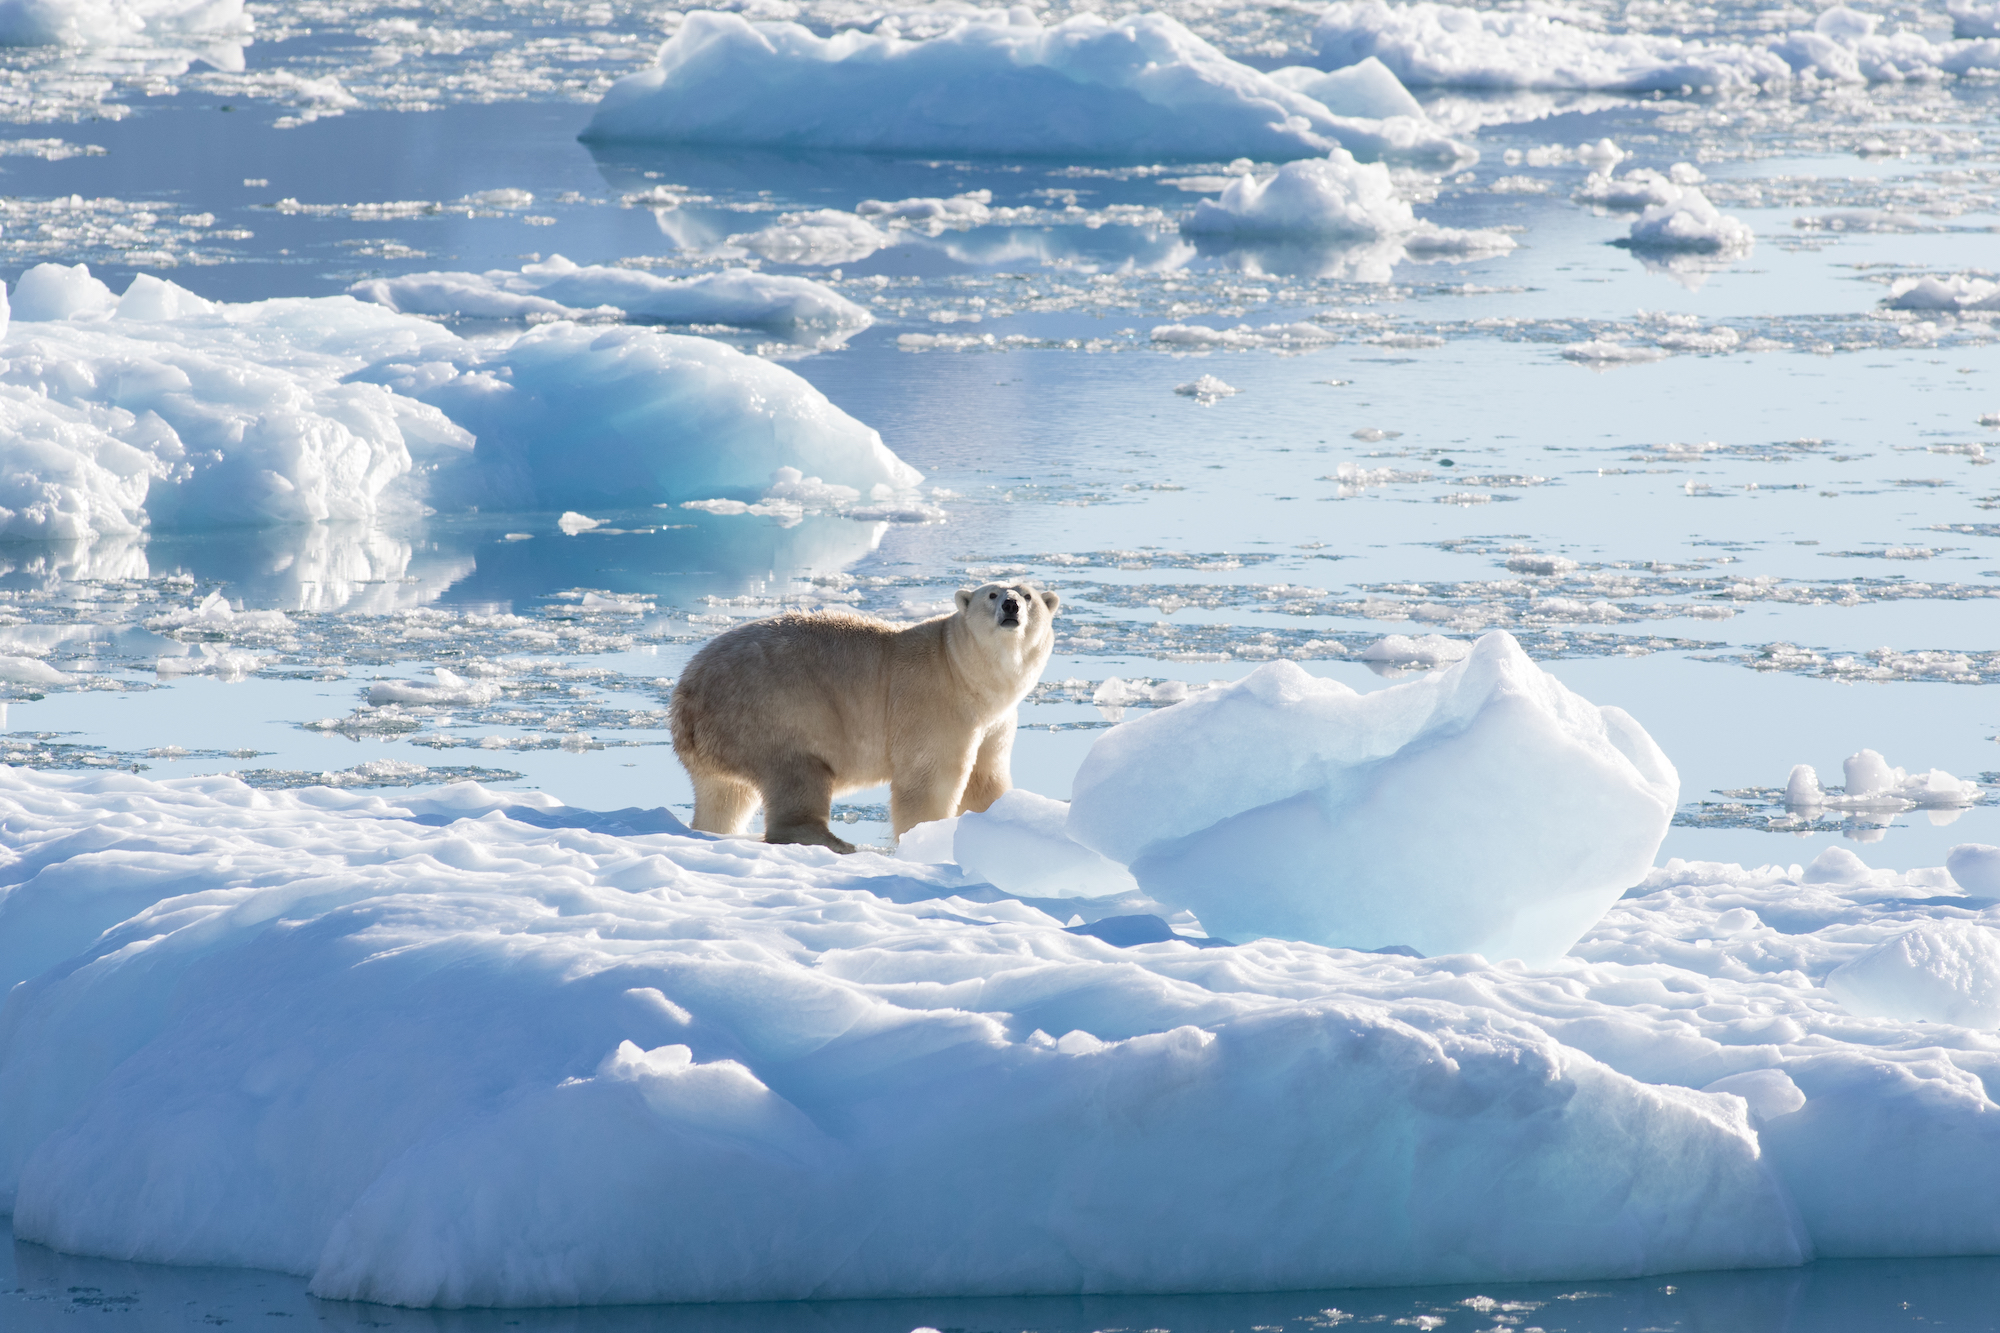 A polar bear standing on ice in Greenland.